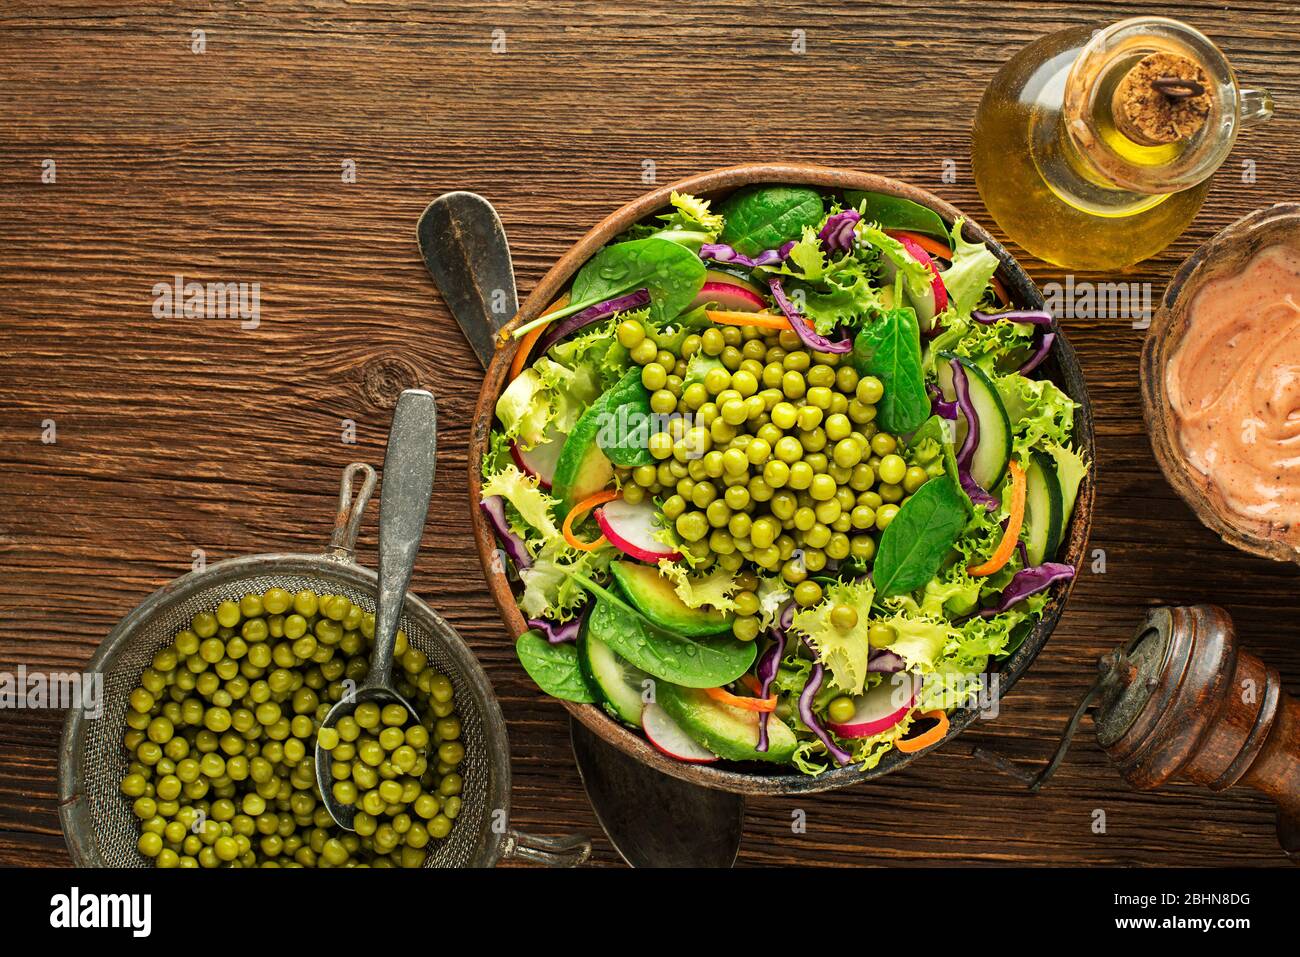 Green lettuce salad meal with fresh vegetables and peas on wooden table background Stock Photo